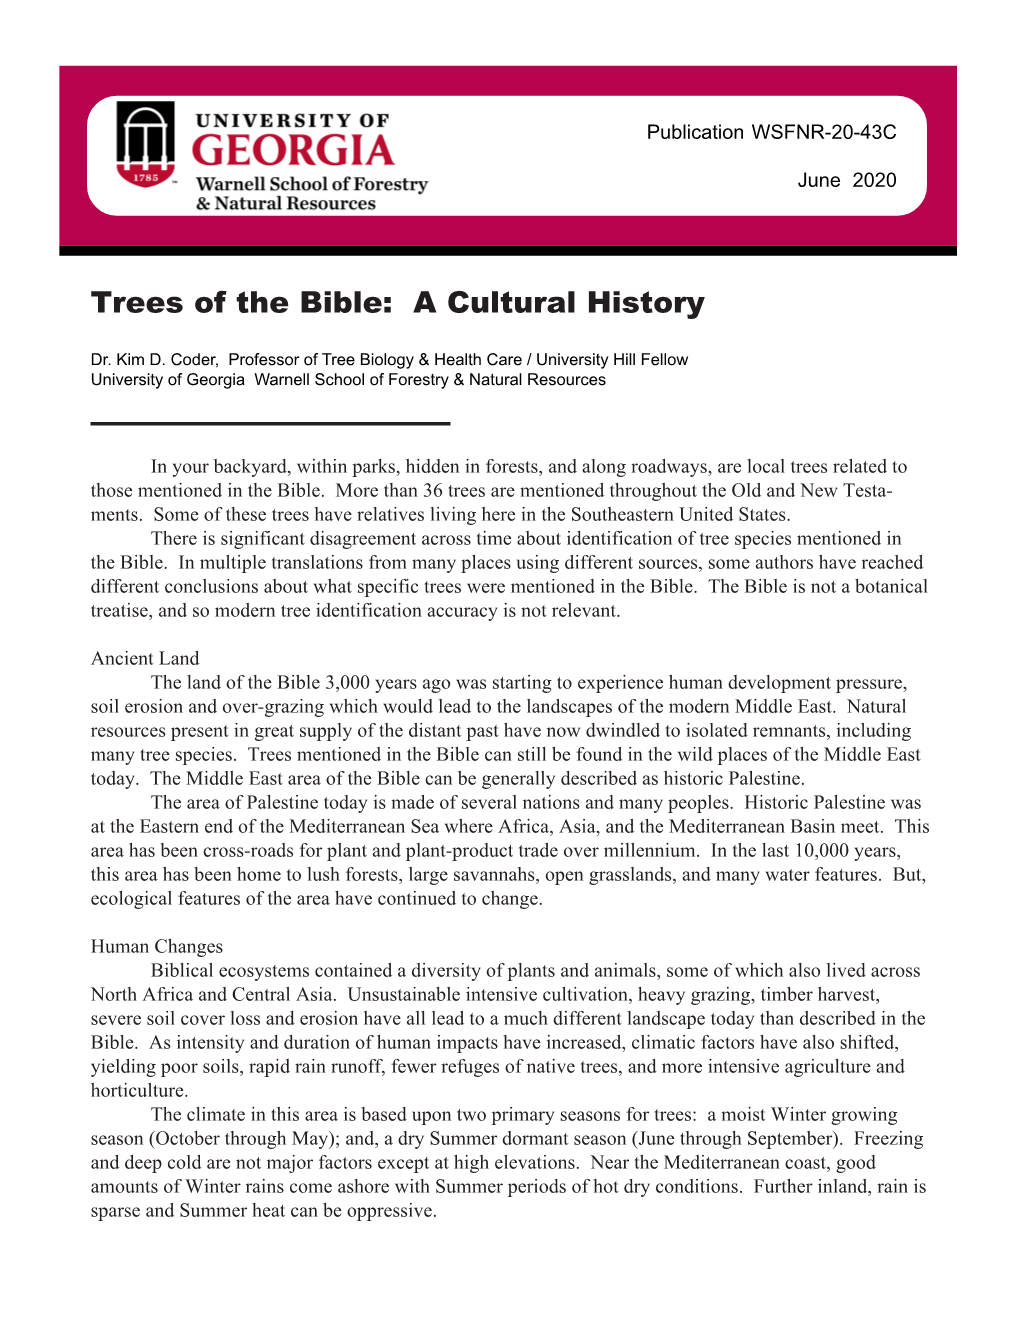 Trees of the Bible Cultural History 2016